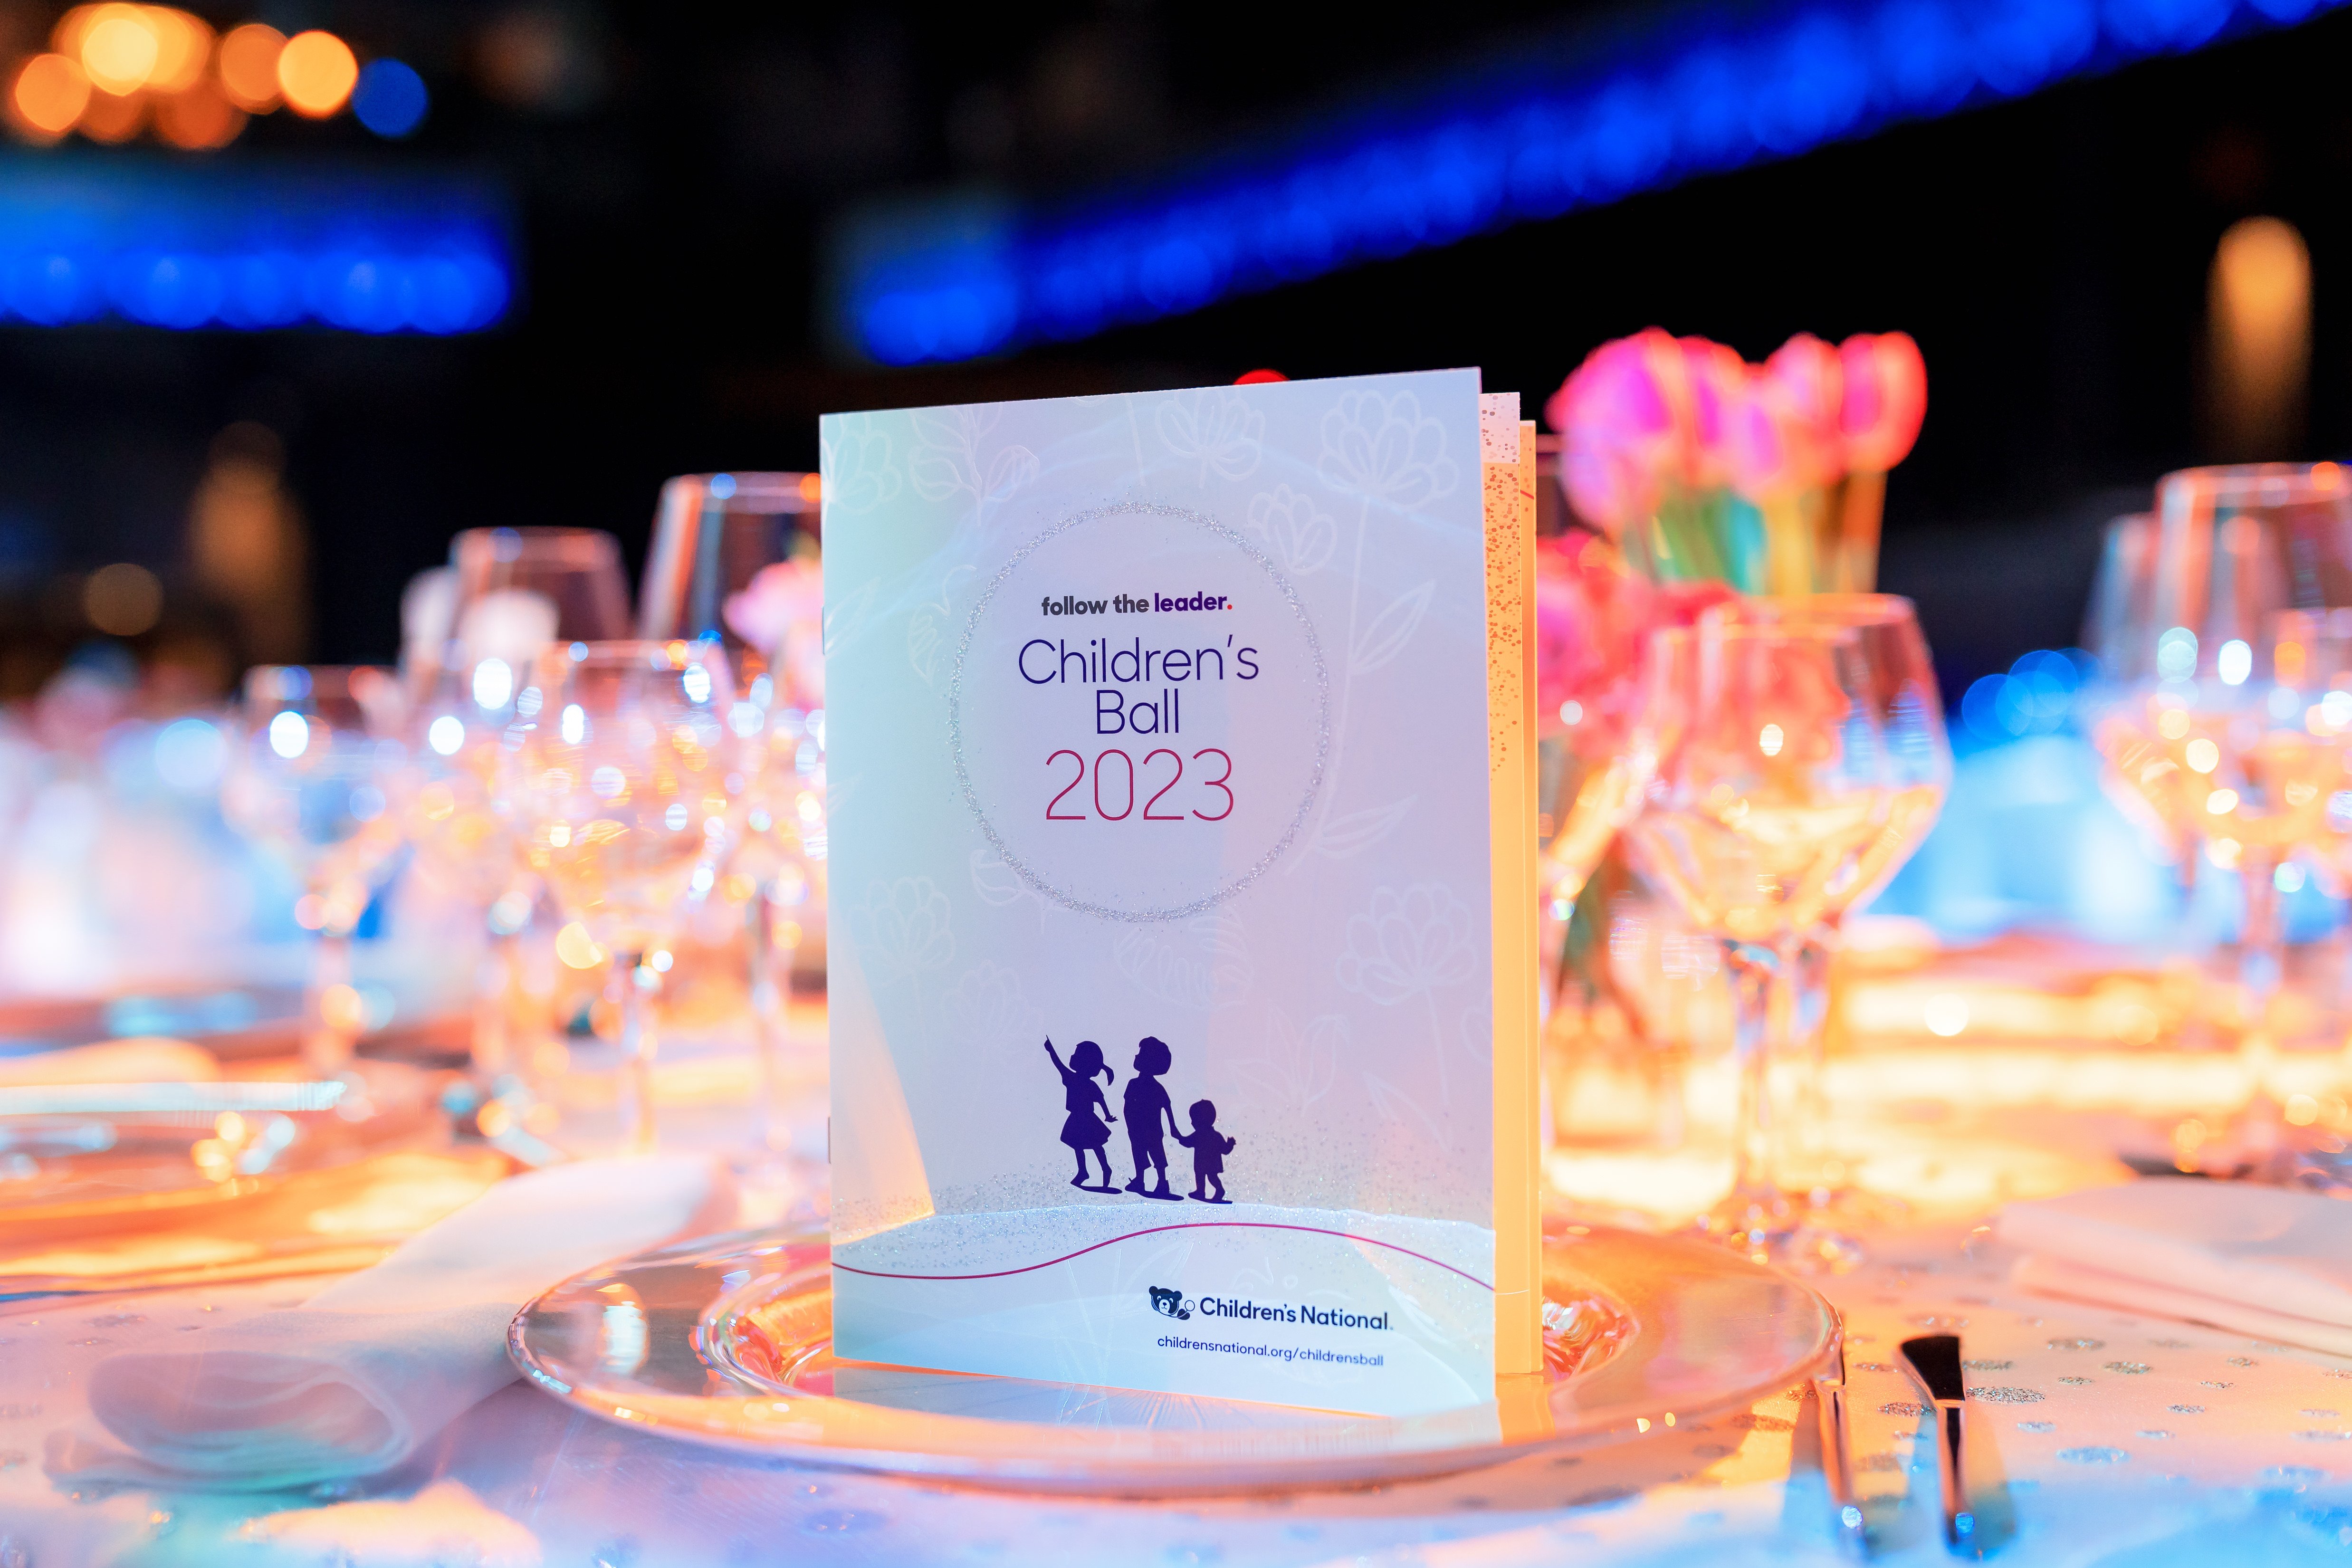    The Children's Ball 2023 program celebrates the close of the follow the leader comprehensive campaign.